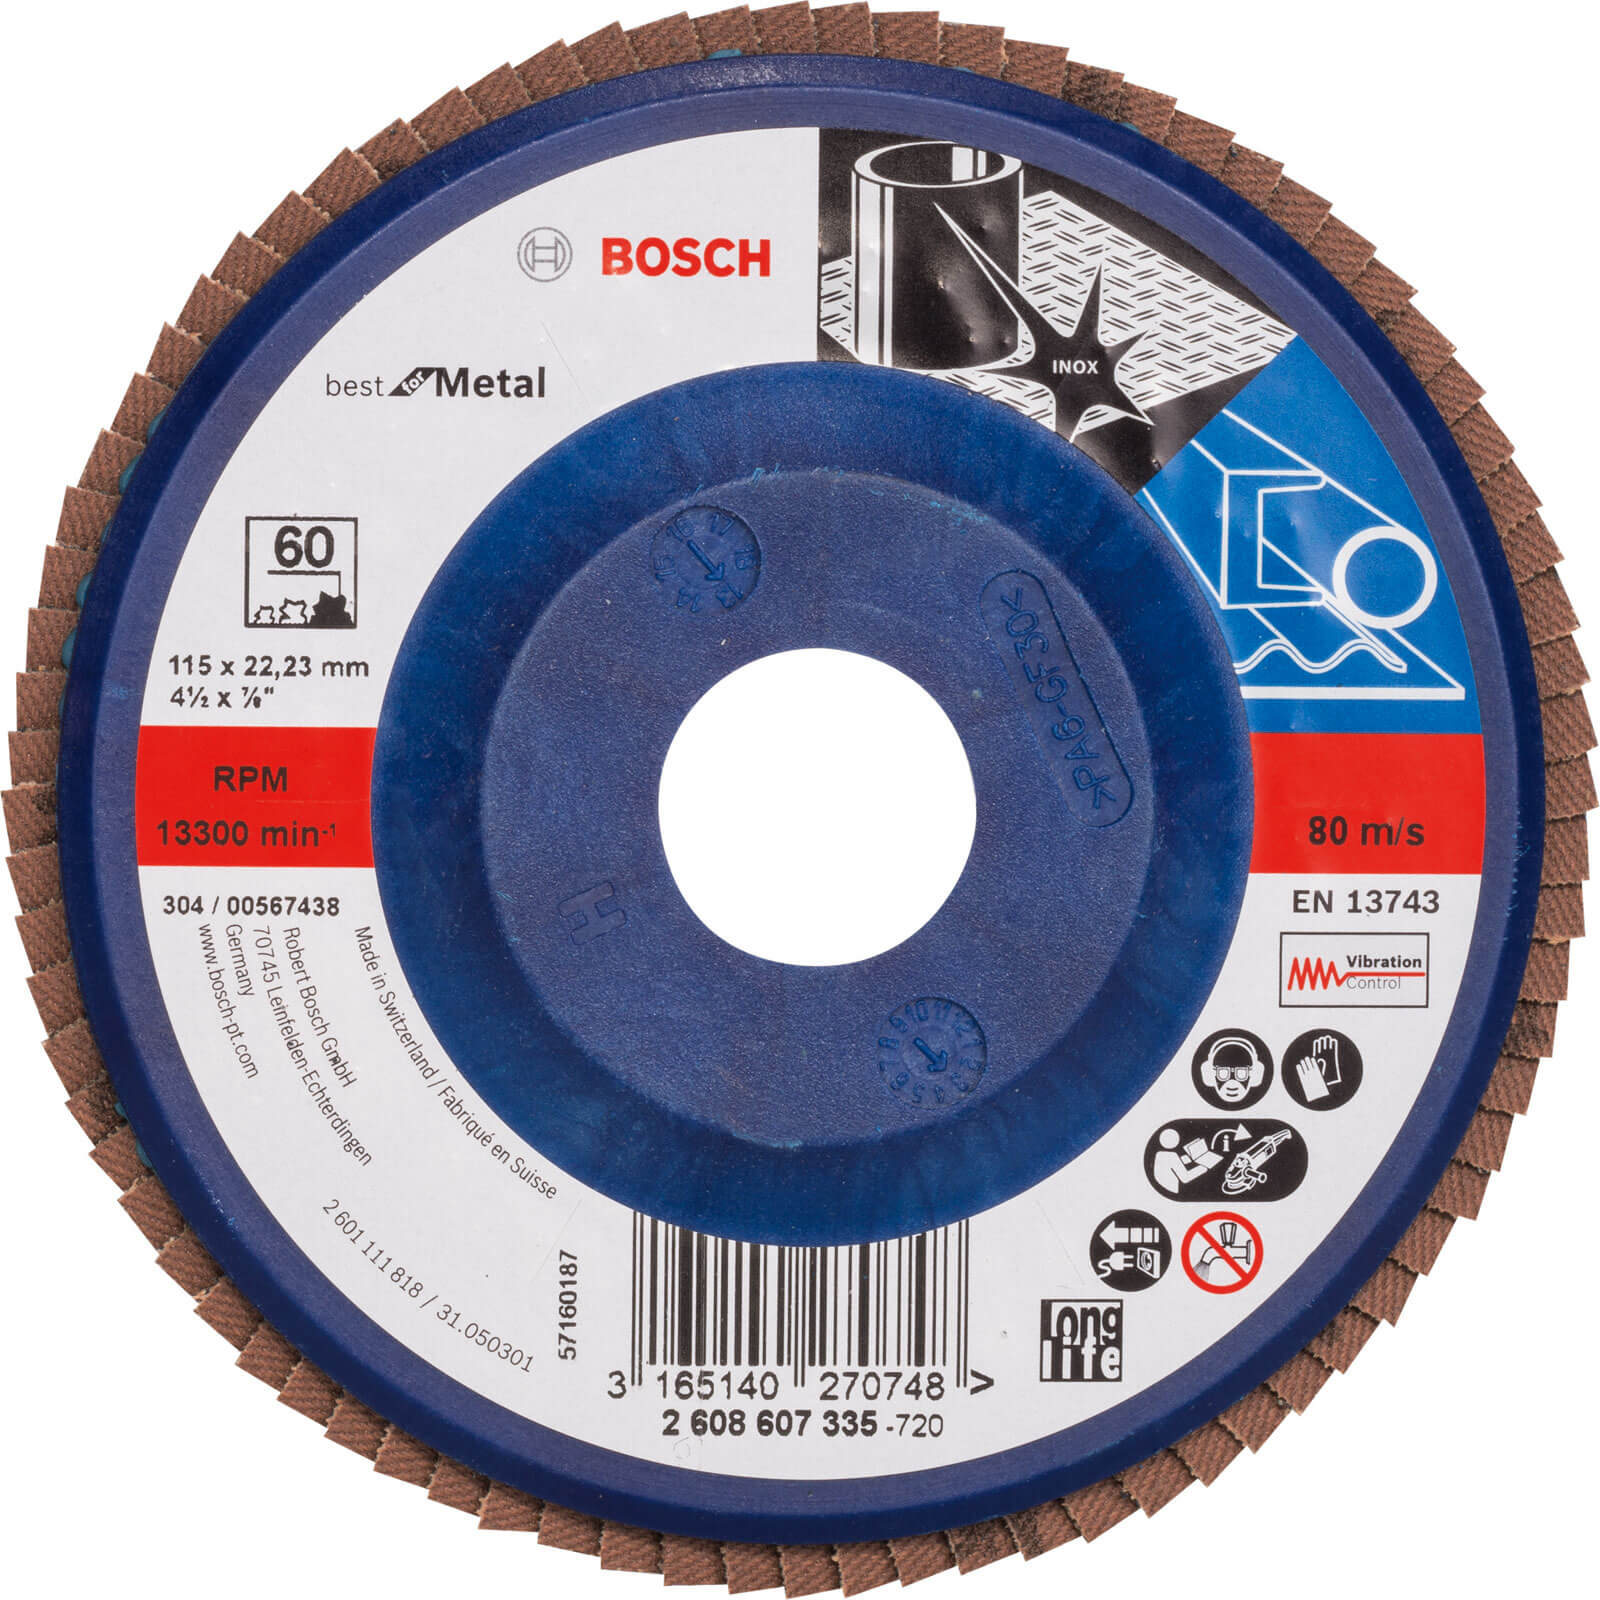 Image of Bosch X571 Best for Metal Straight Flap Disc 115mm 60g Pack of 1